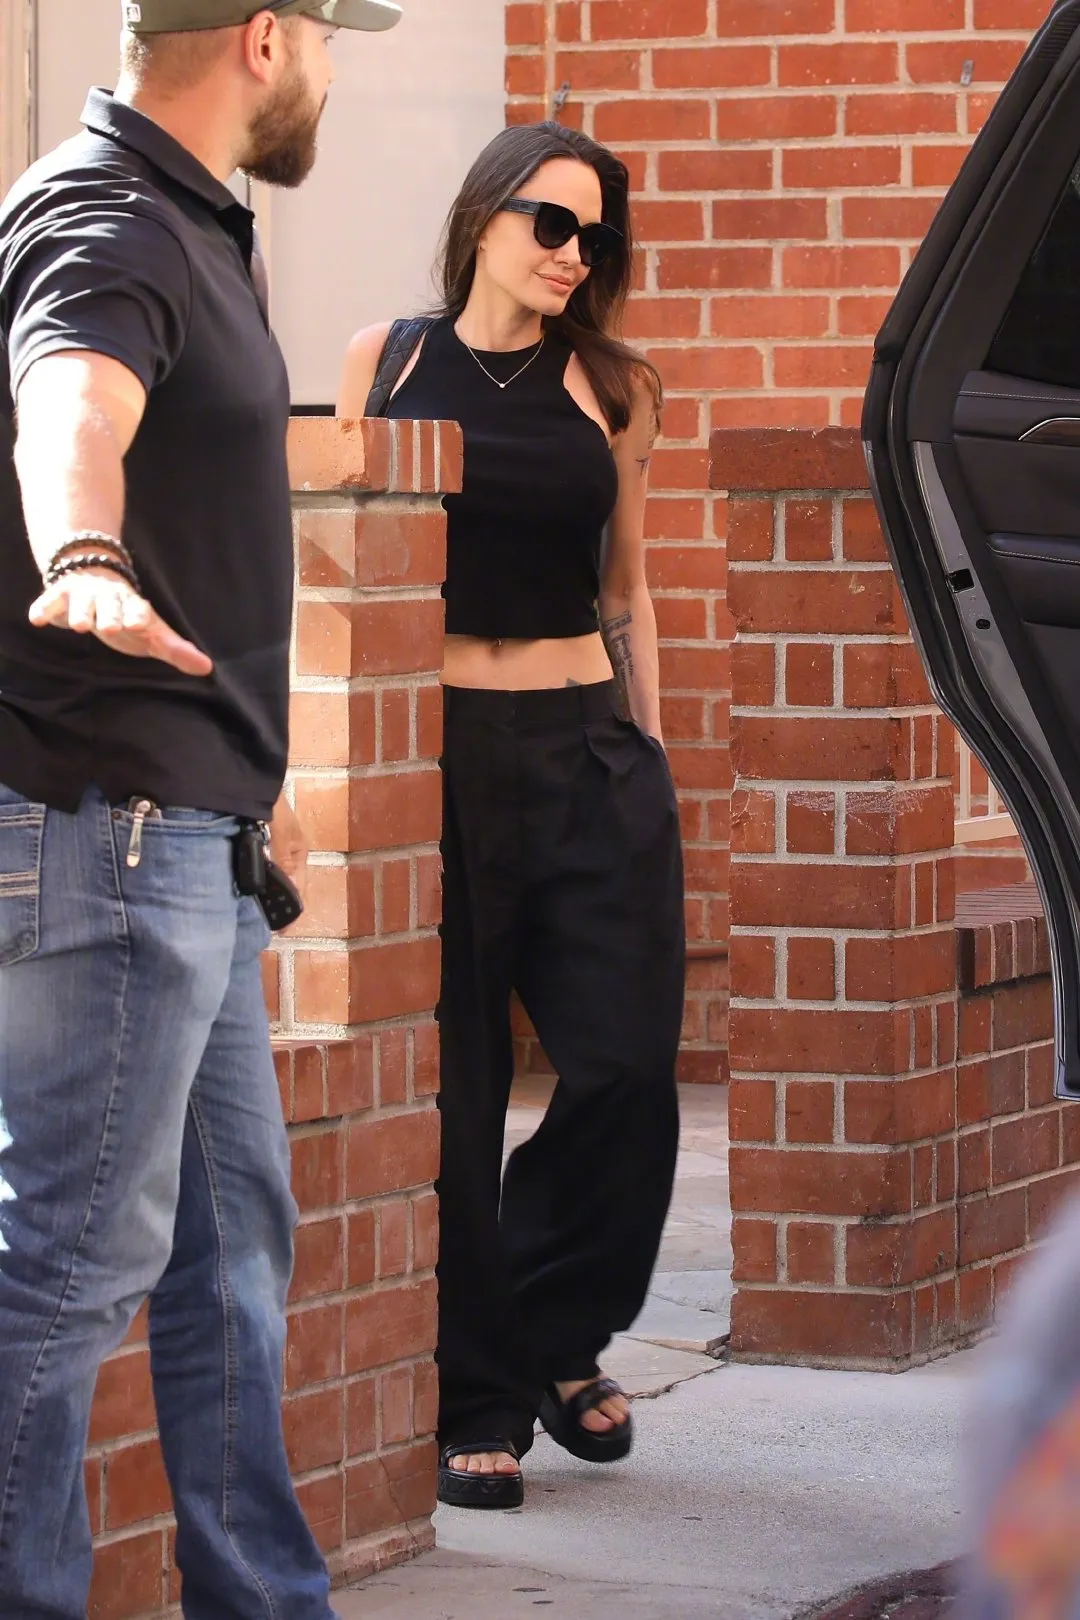 Angelina Jolie recently went out photos | FMV6